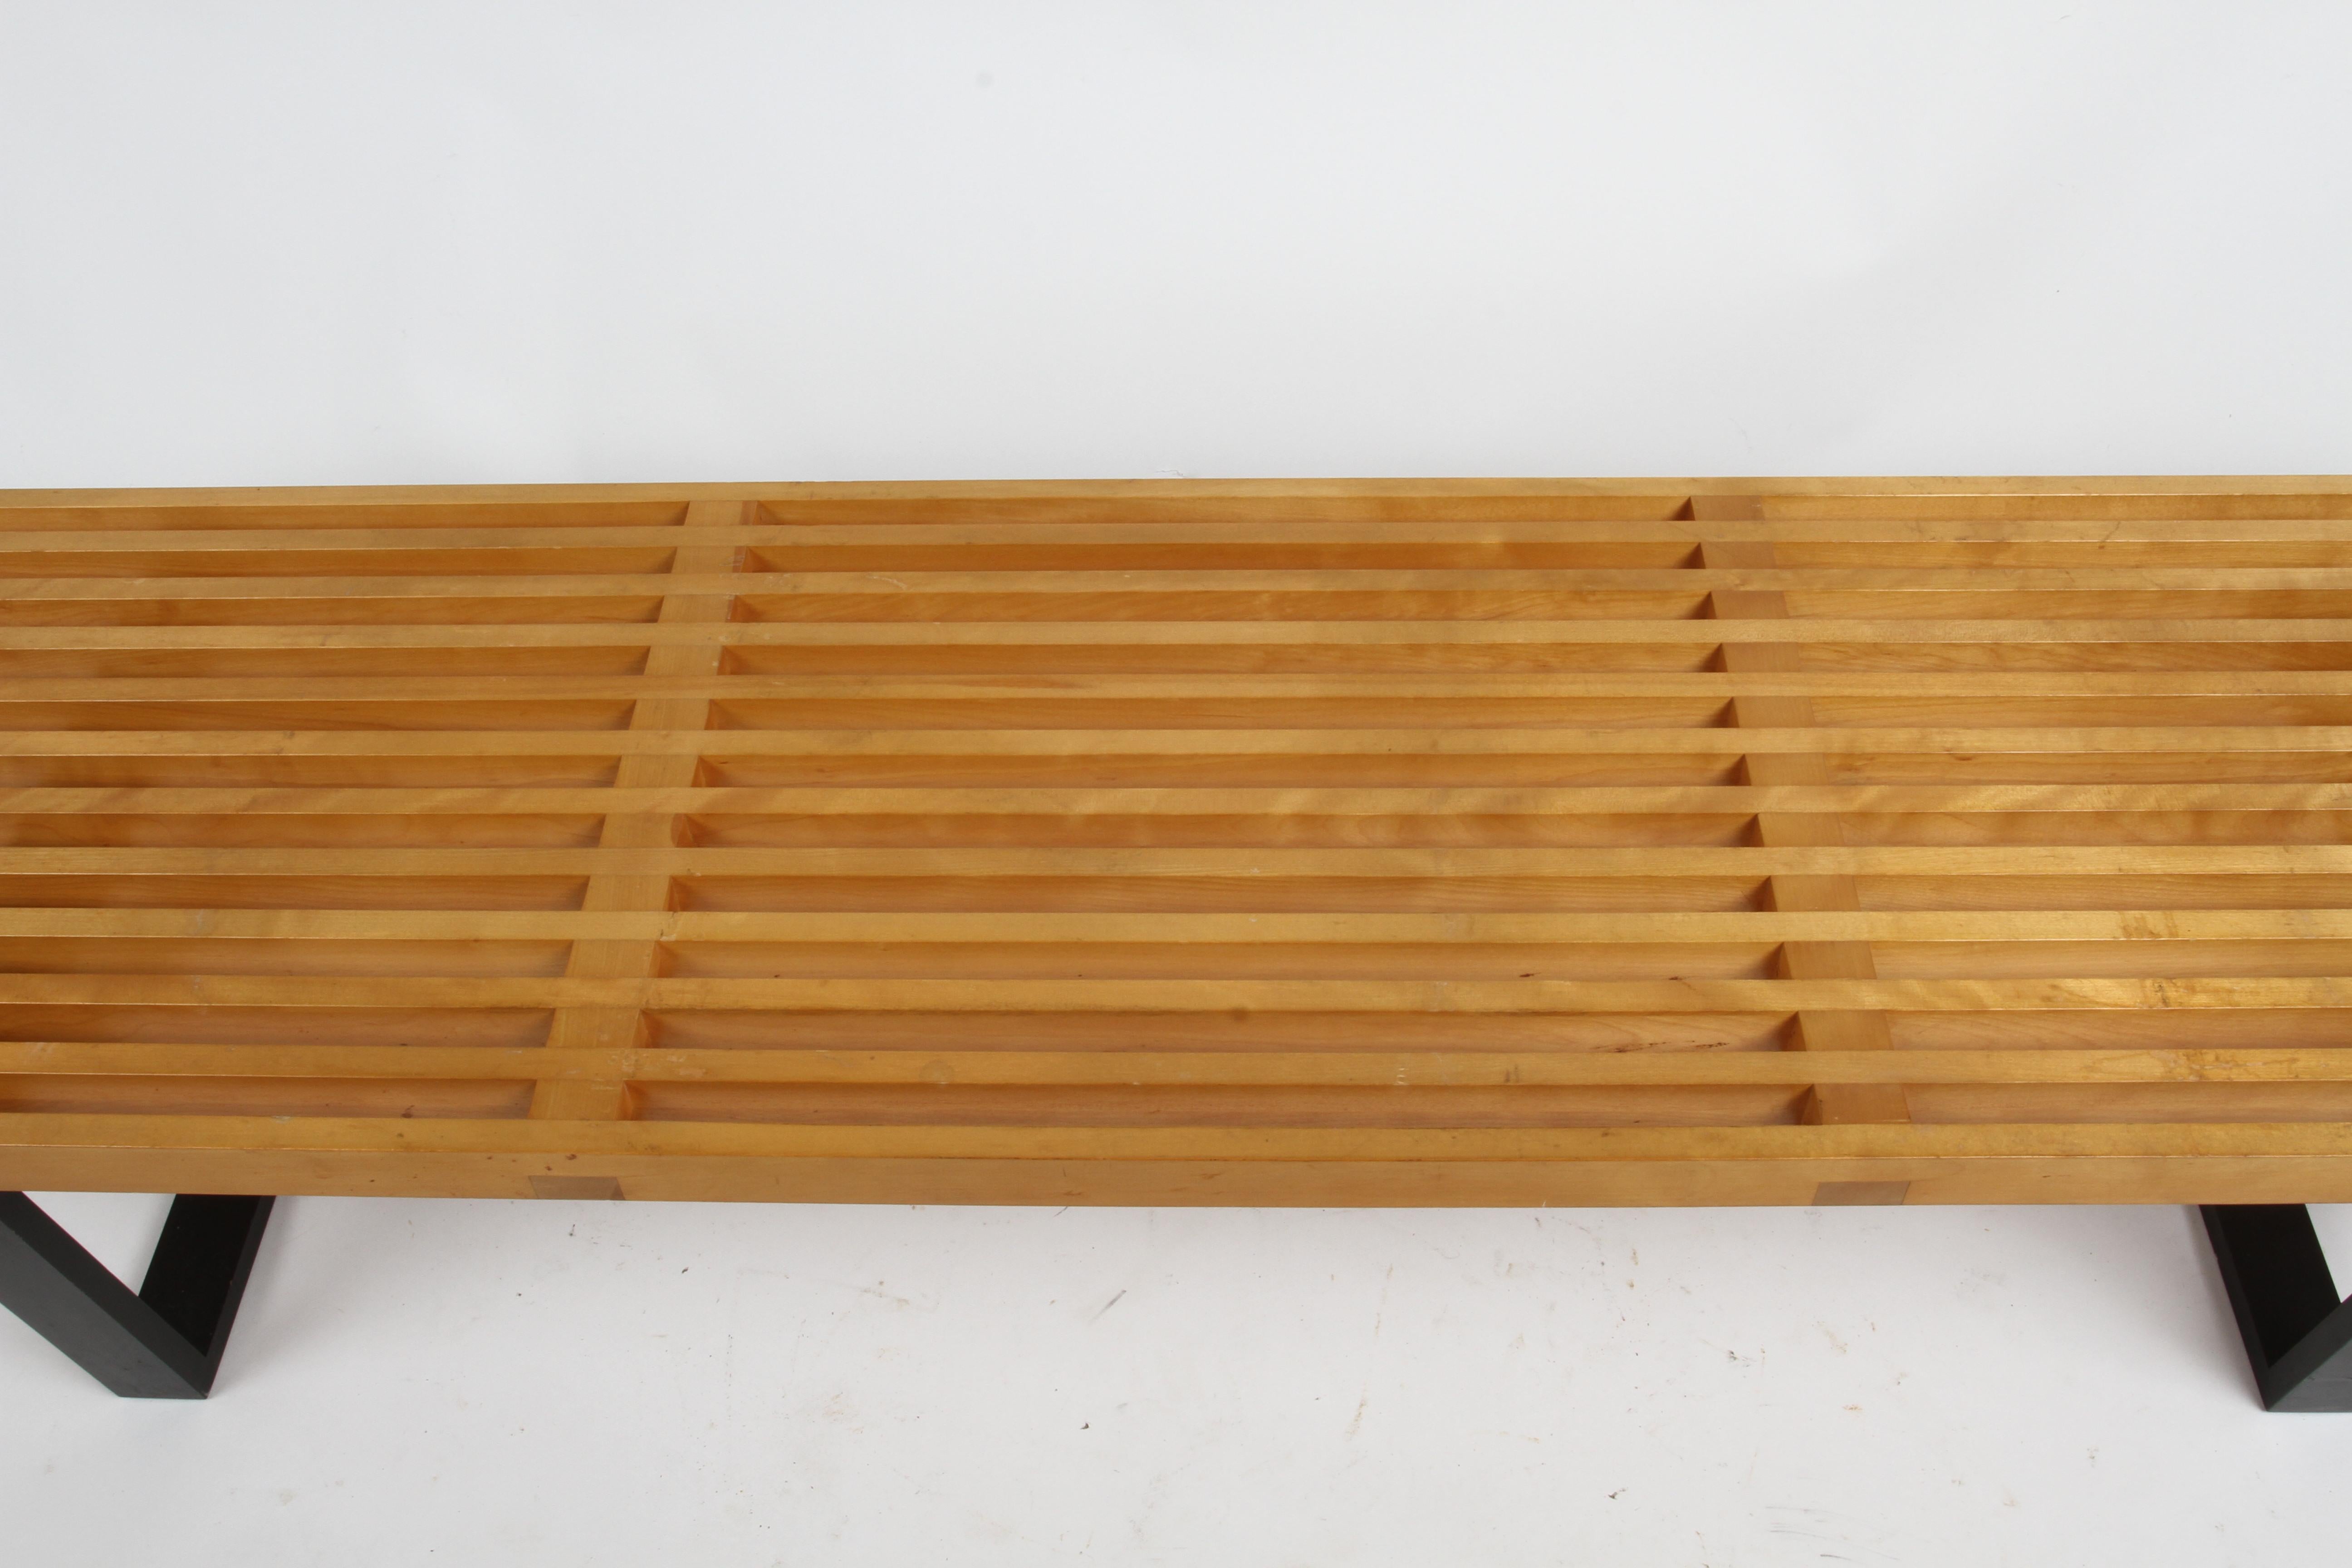 North American Iconic George Nelson #4691 Vintage Slat Bench for Herman Miller Uncommon 68